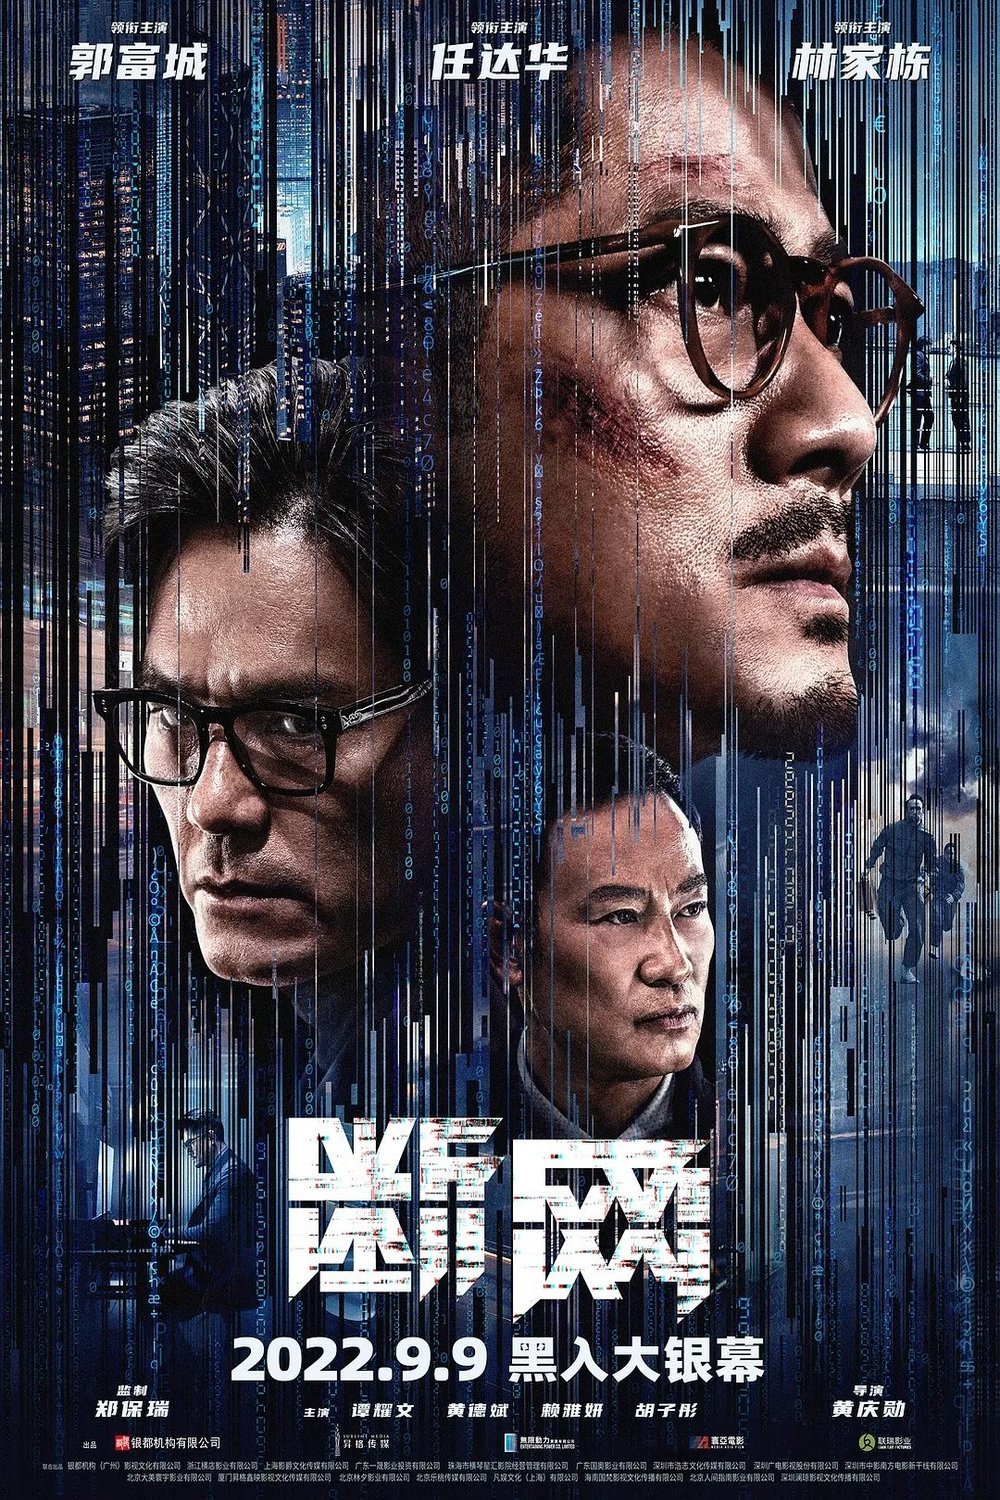 Cantonese poster of the movie Cyber Heist